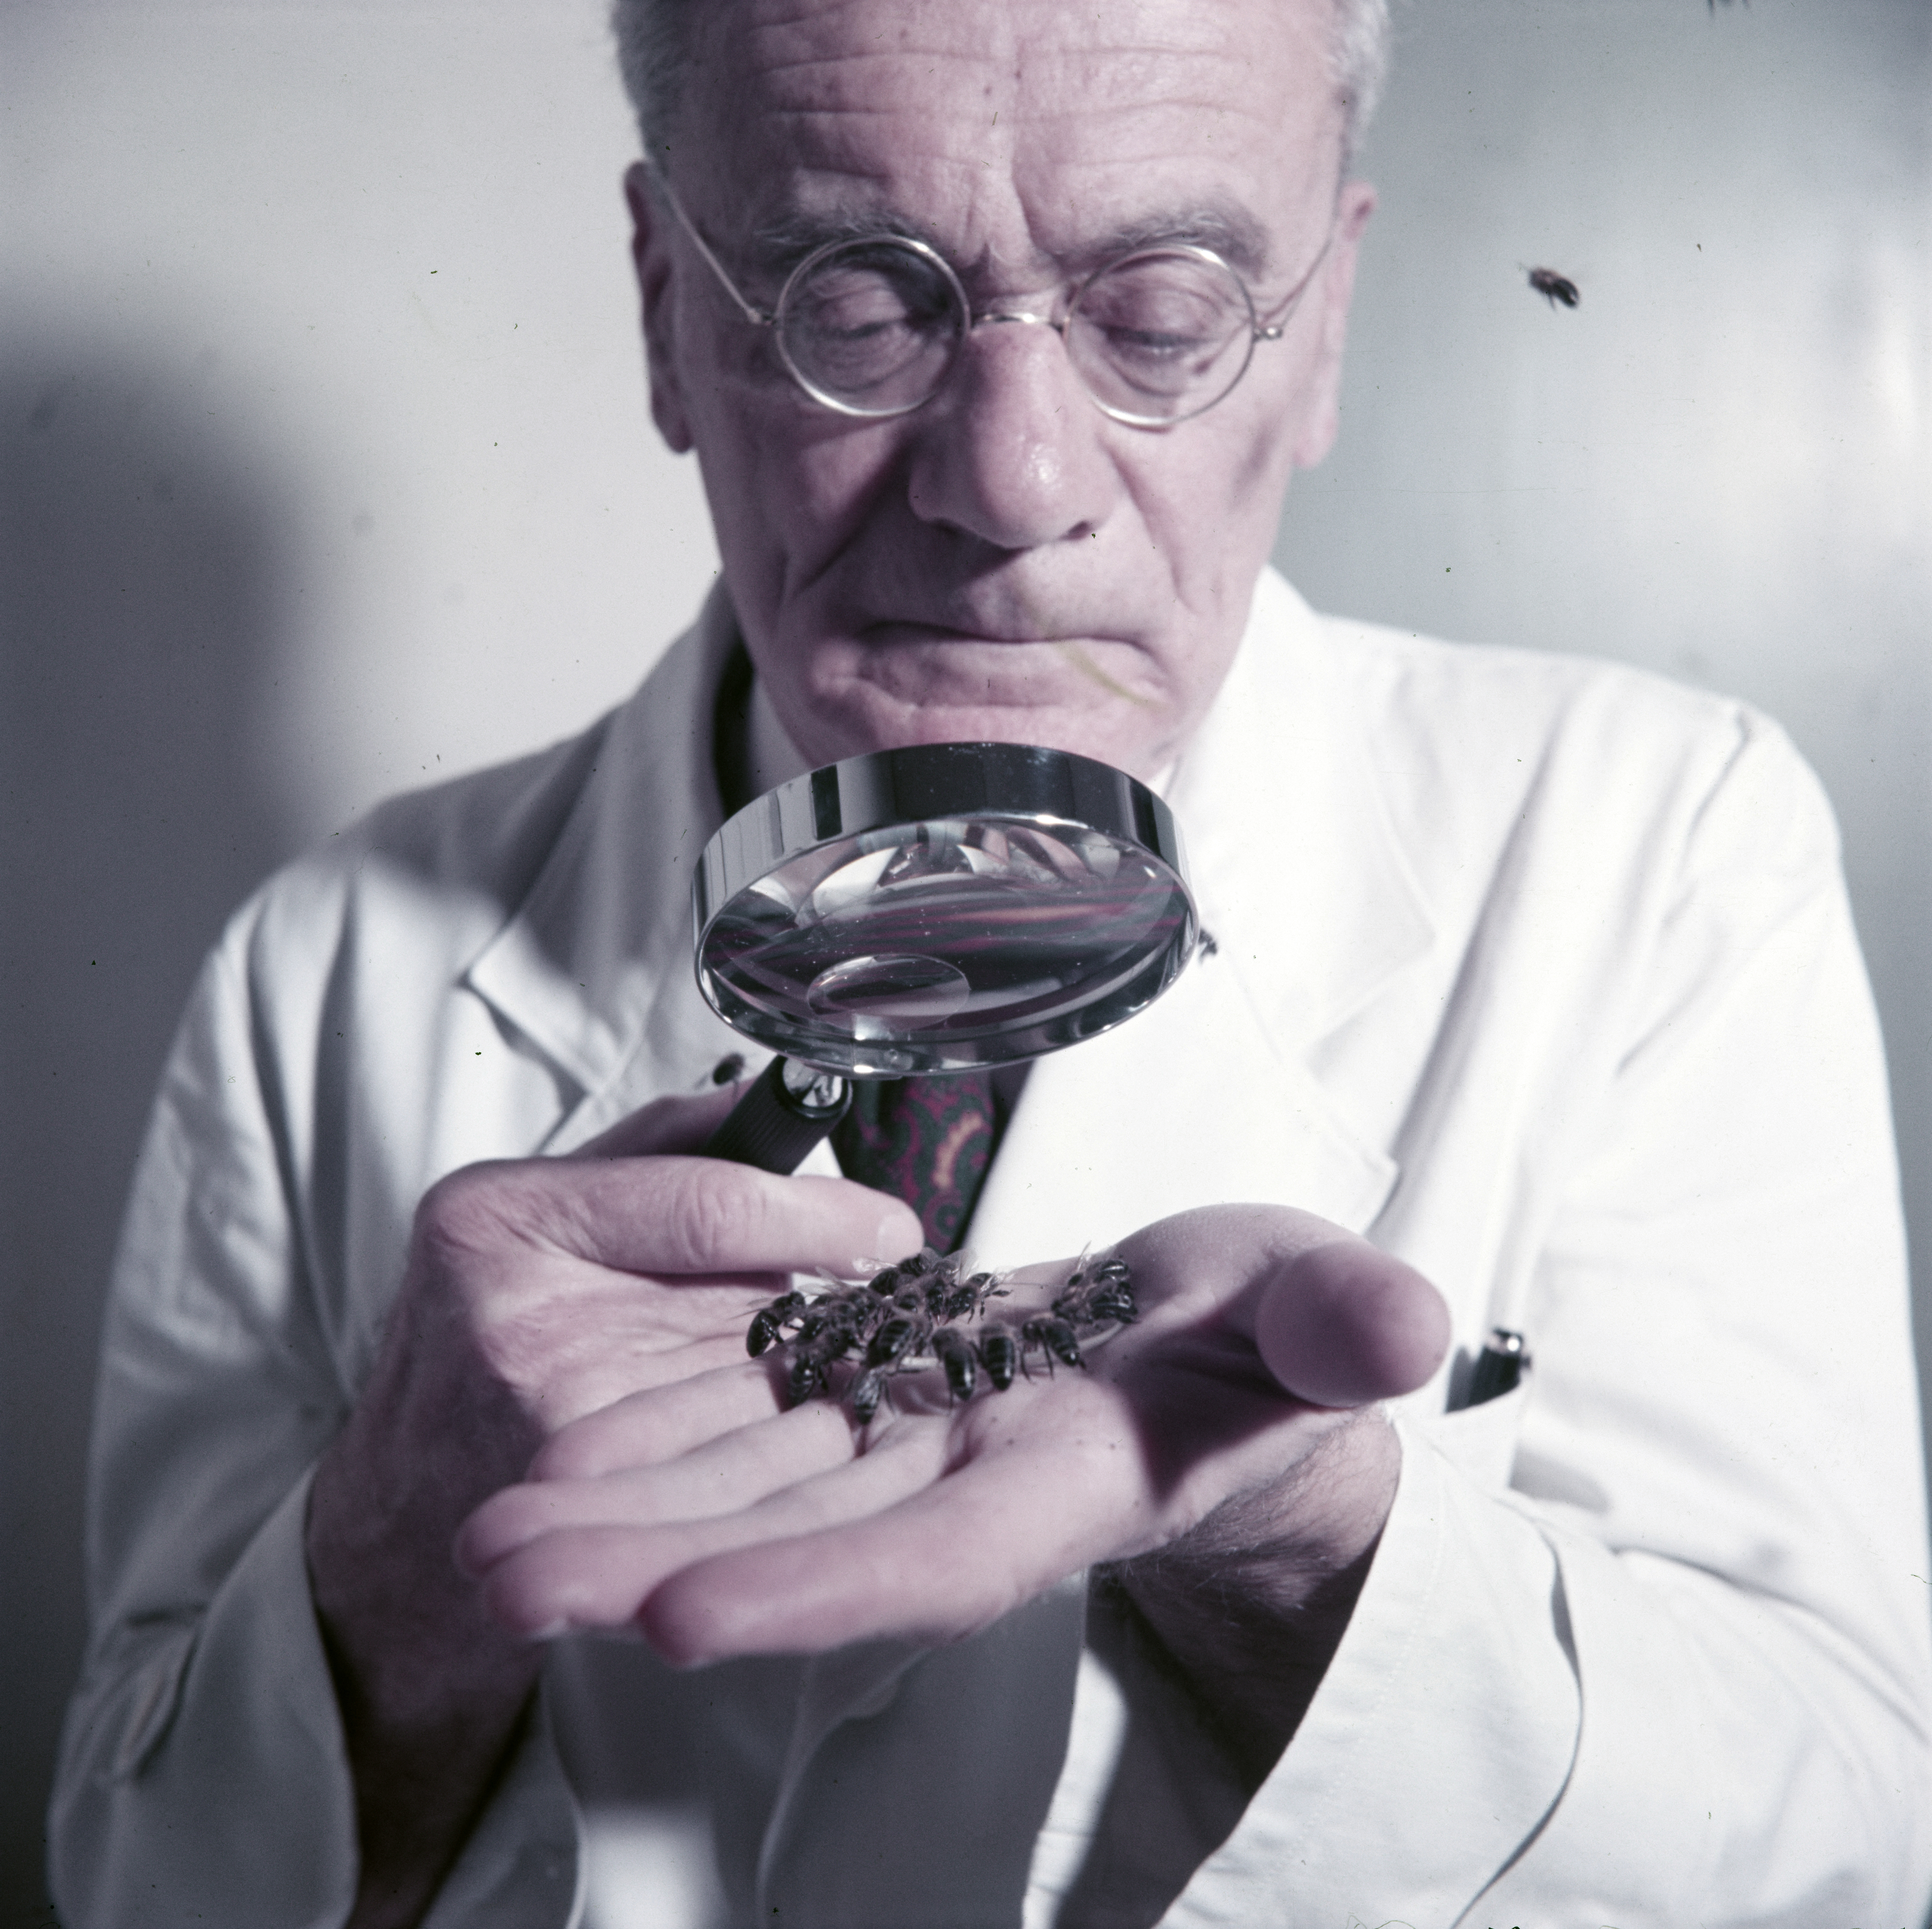 Scientist with magnifying glass and bees